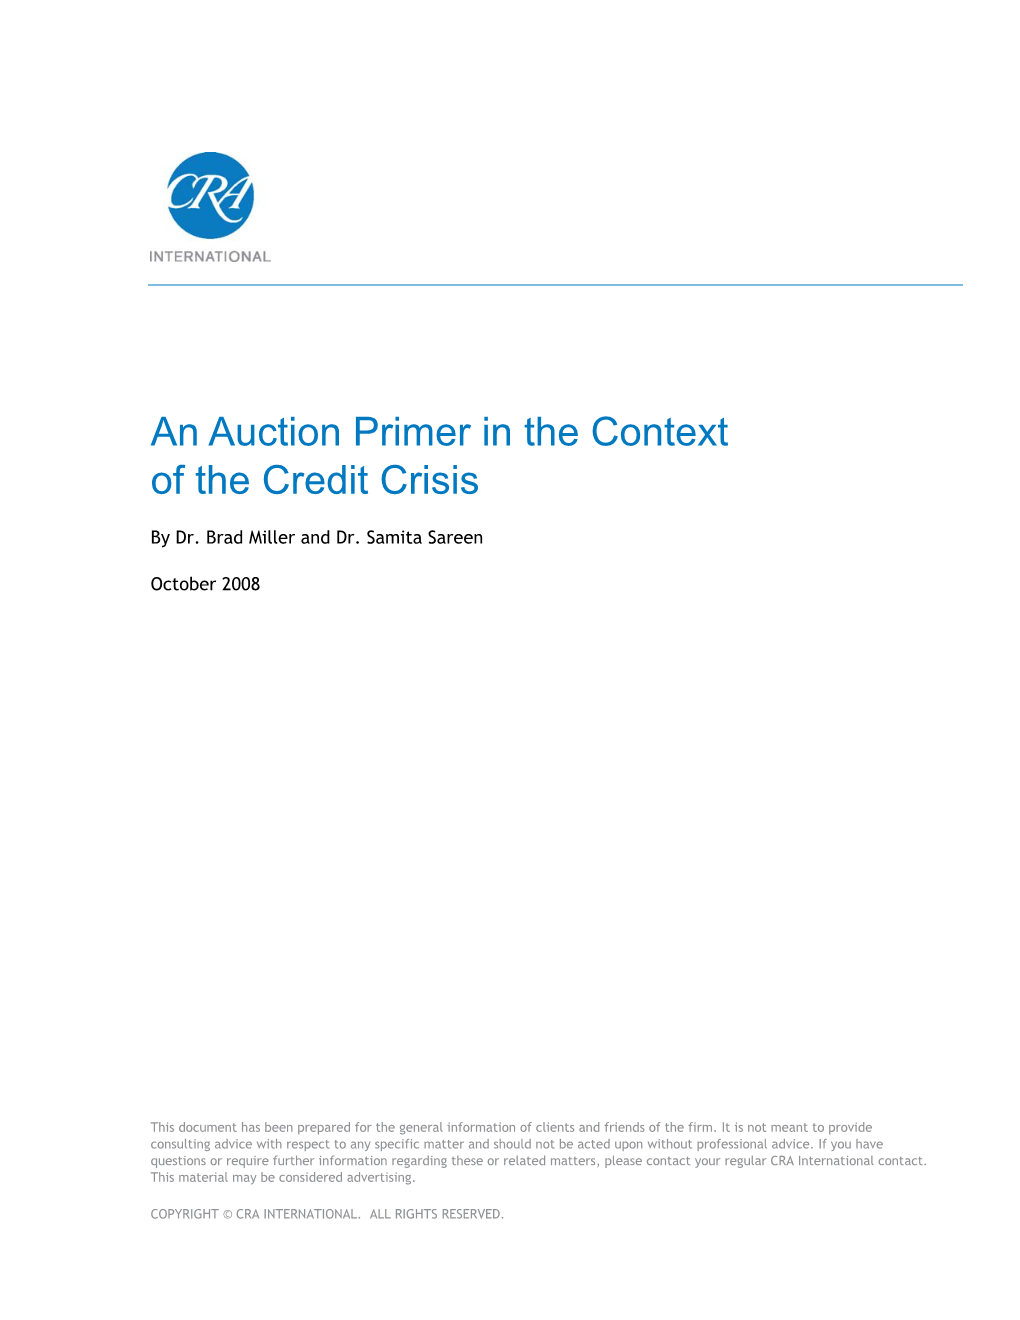 An Auction Primer in the Context of the Credit Crisis